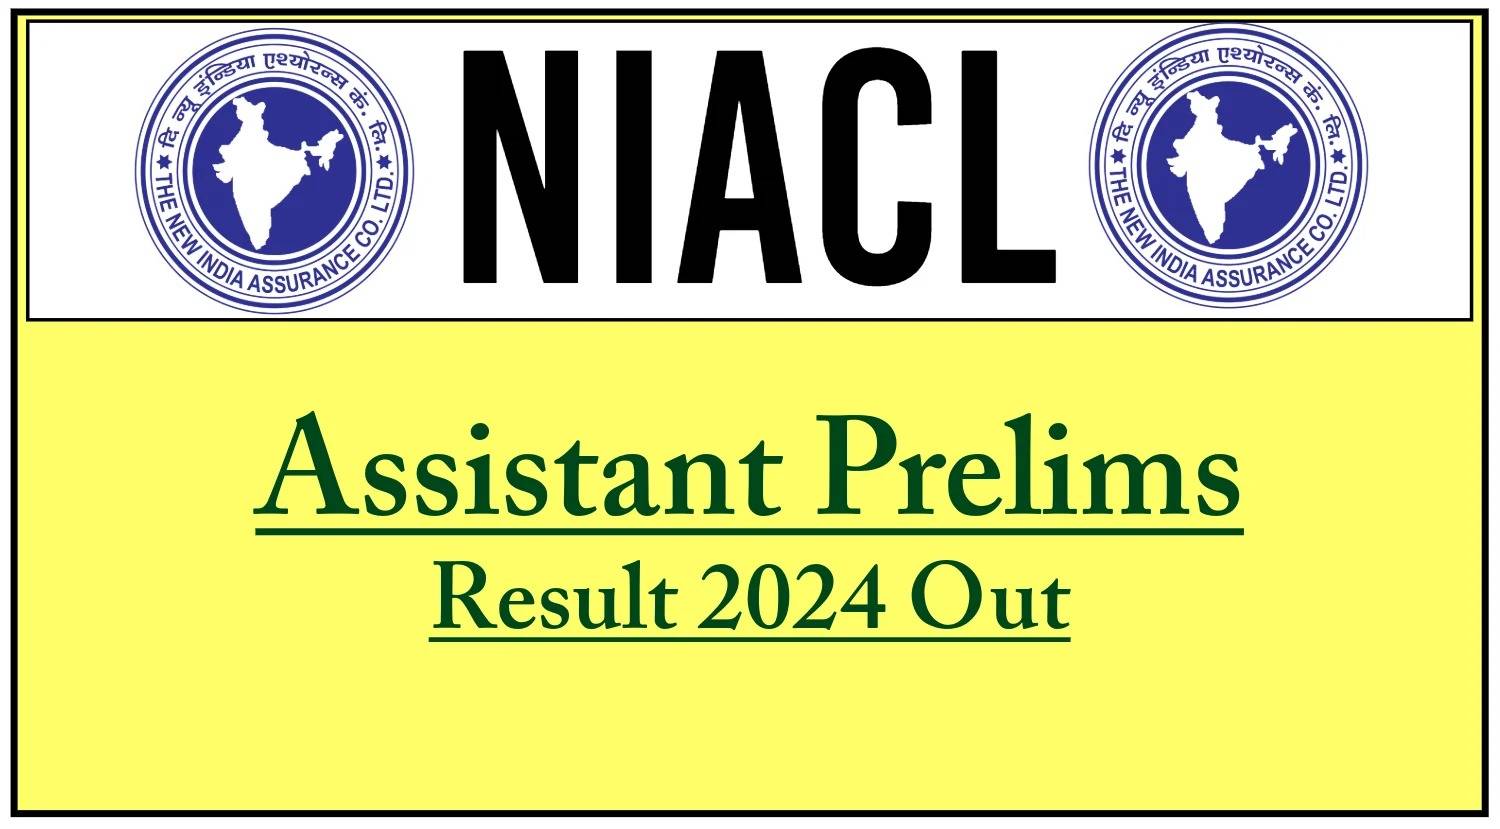 NIACL Assistant Result 2024 Declared: Check Tier I (Preliminary) Exam Result Now